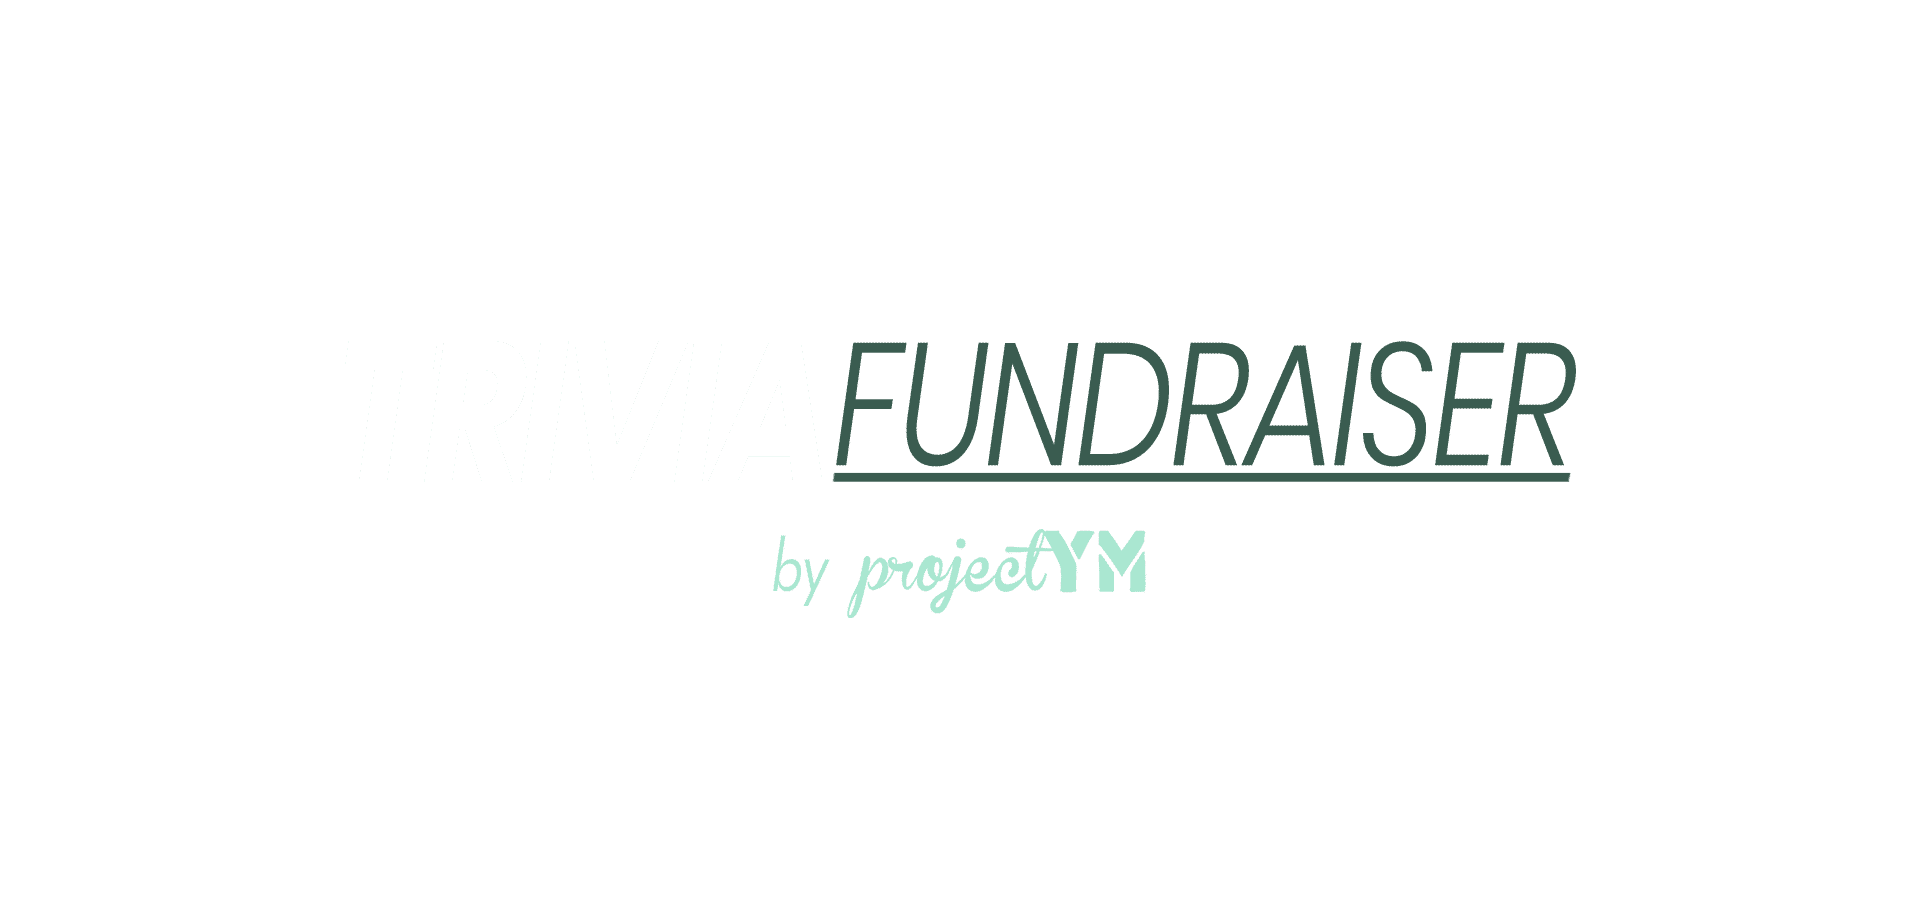 Trivia Night Fundraiser – The Fundraising Event for Ministry, Church, Schools, Community Groups and Organizations